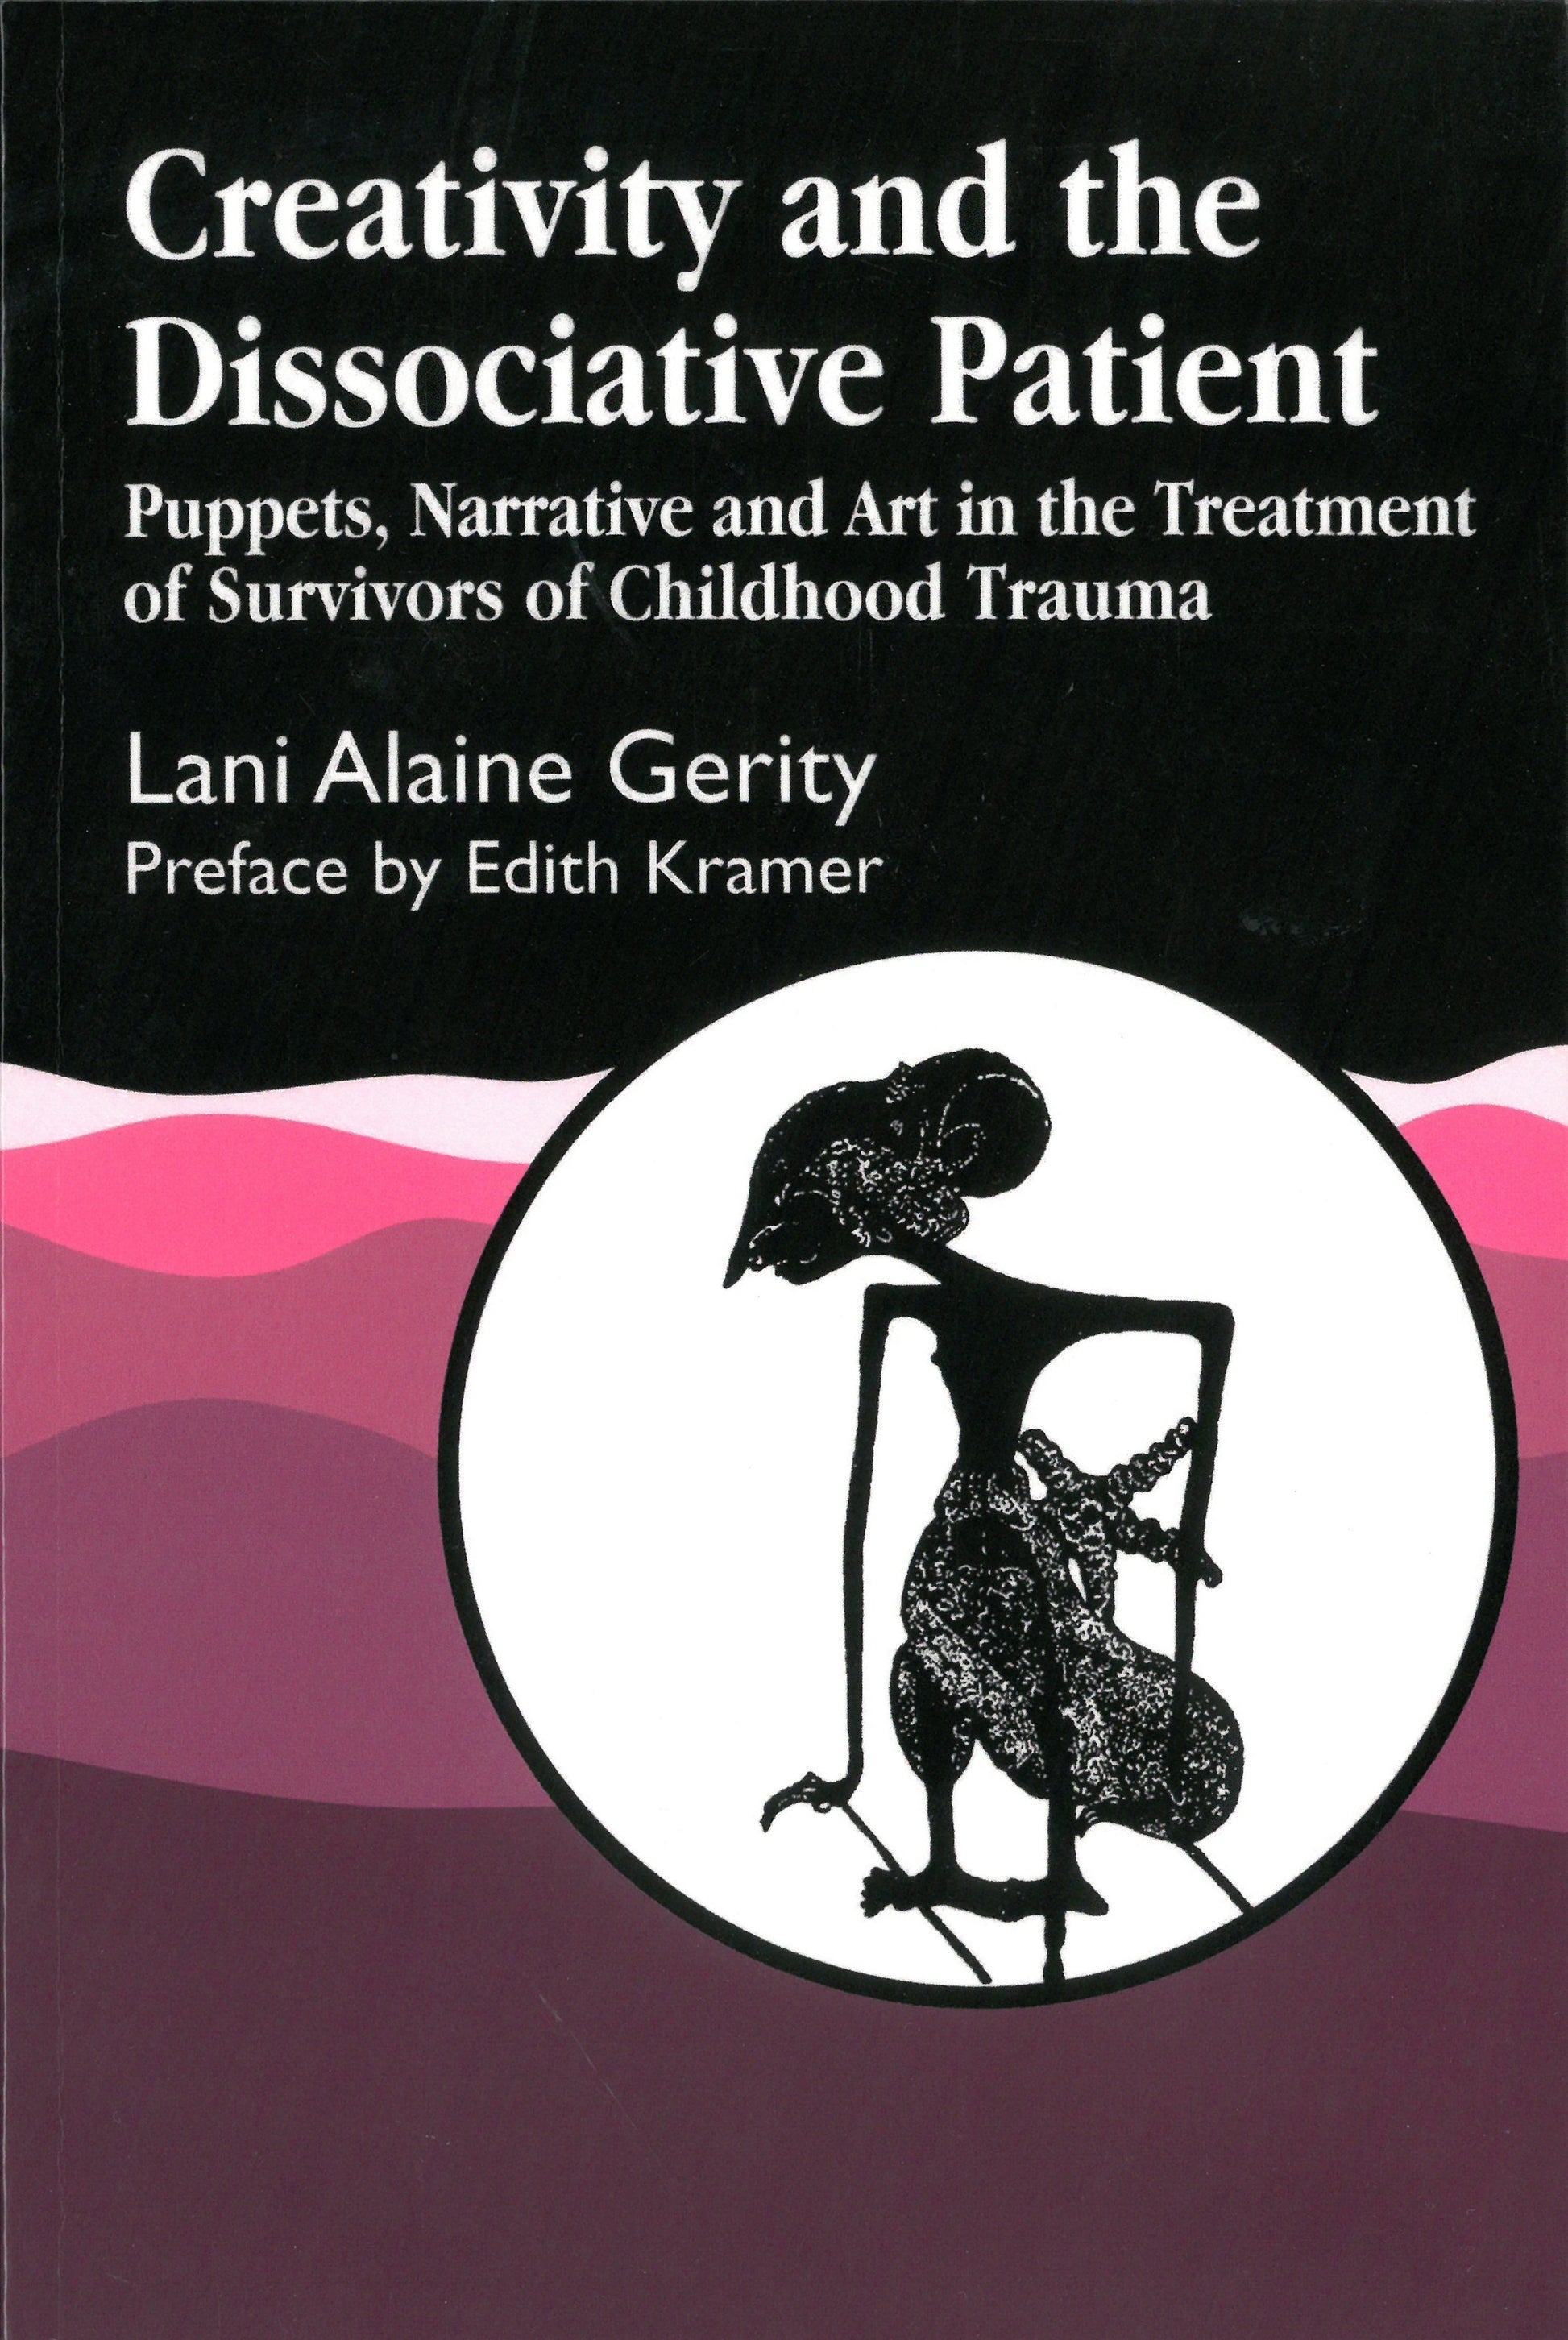 Creativity and the Dissociative Patient by Lani Gerity, Edith Kramer